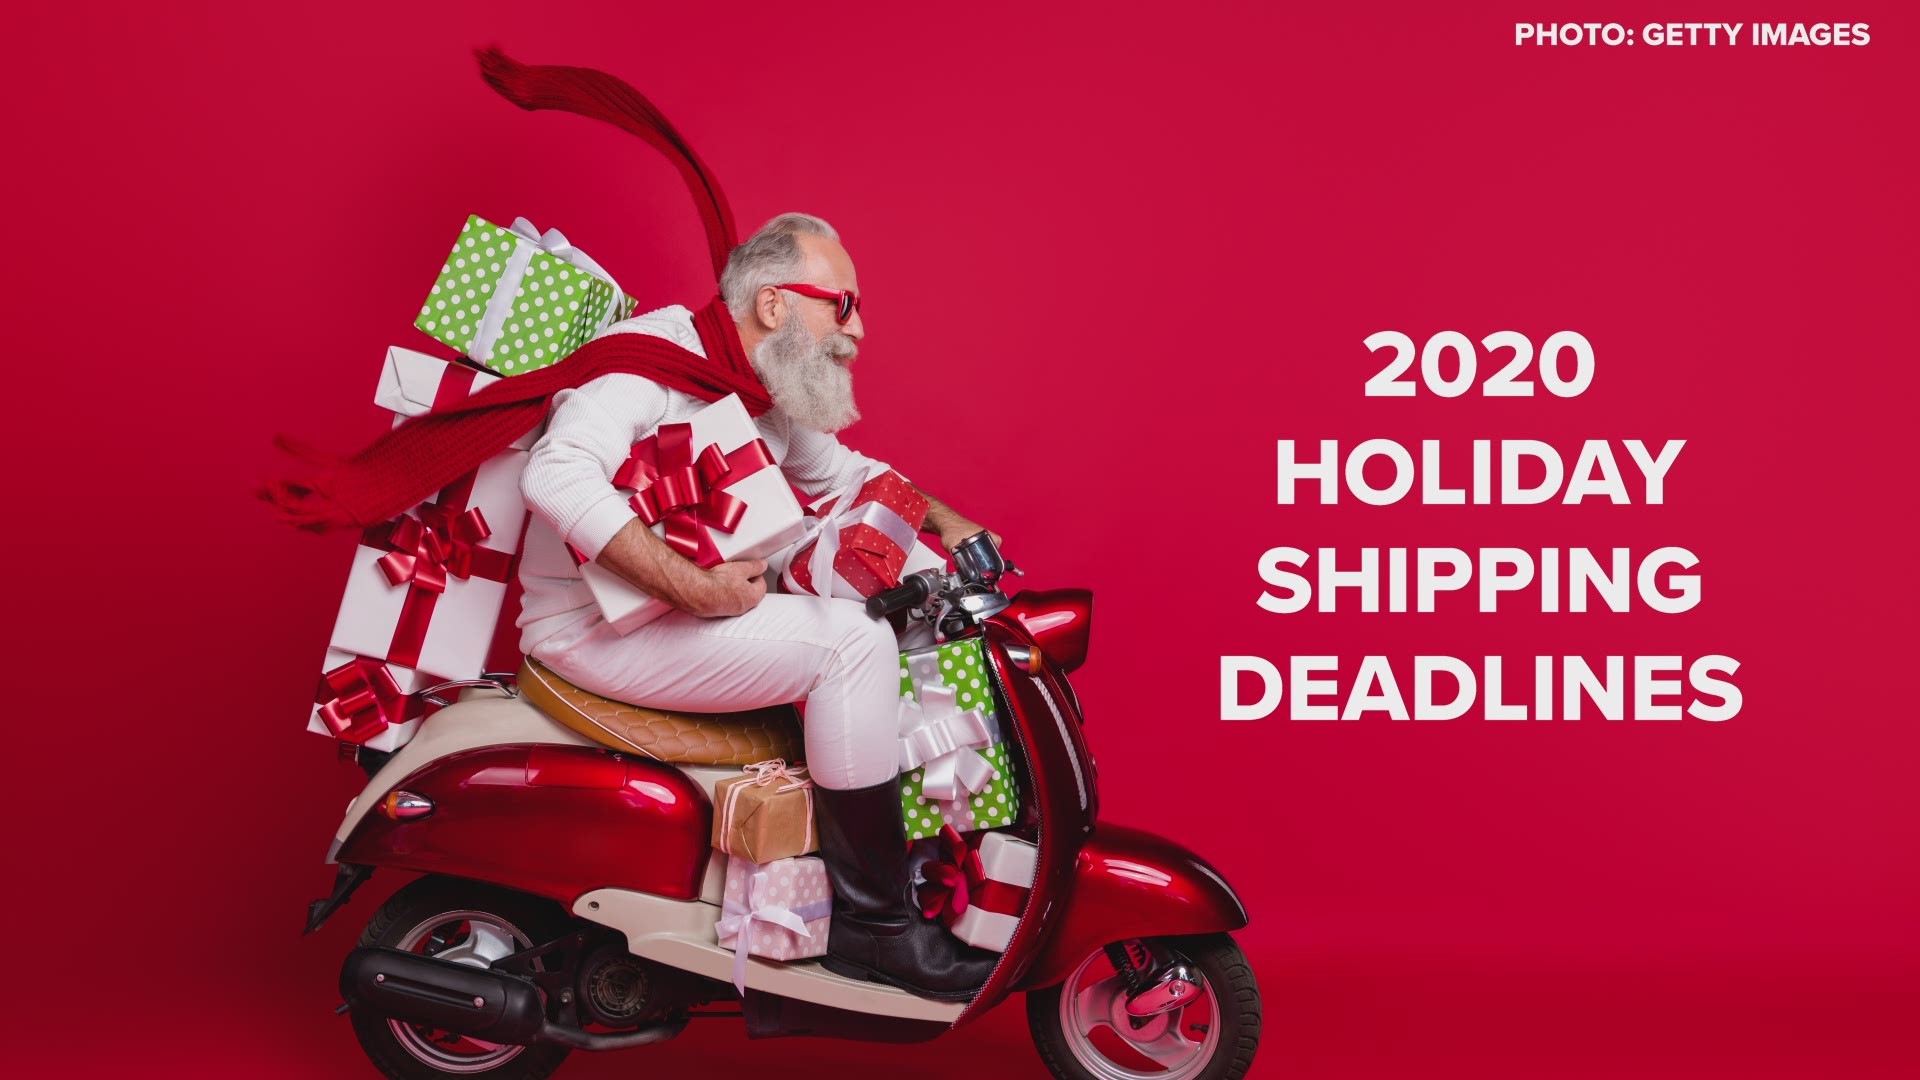 Here are the recommendations on when you should ship your gifts and packages this holiday season.